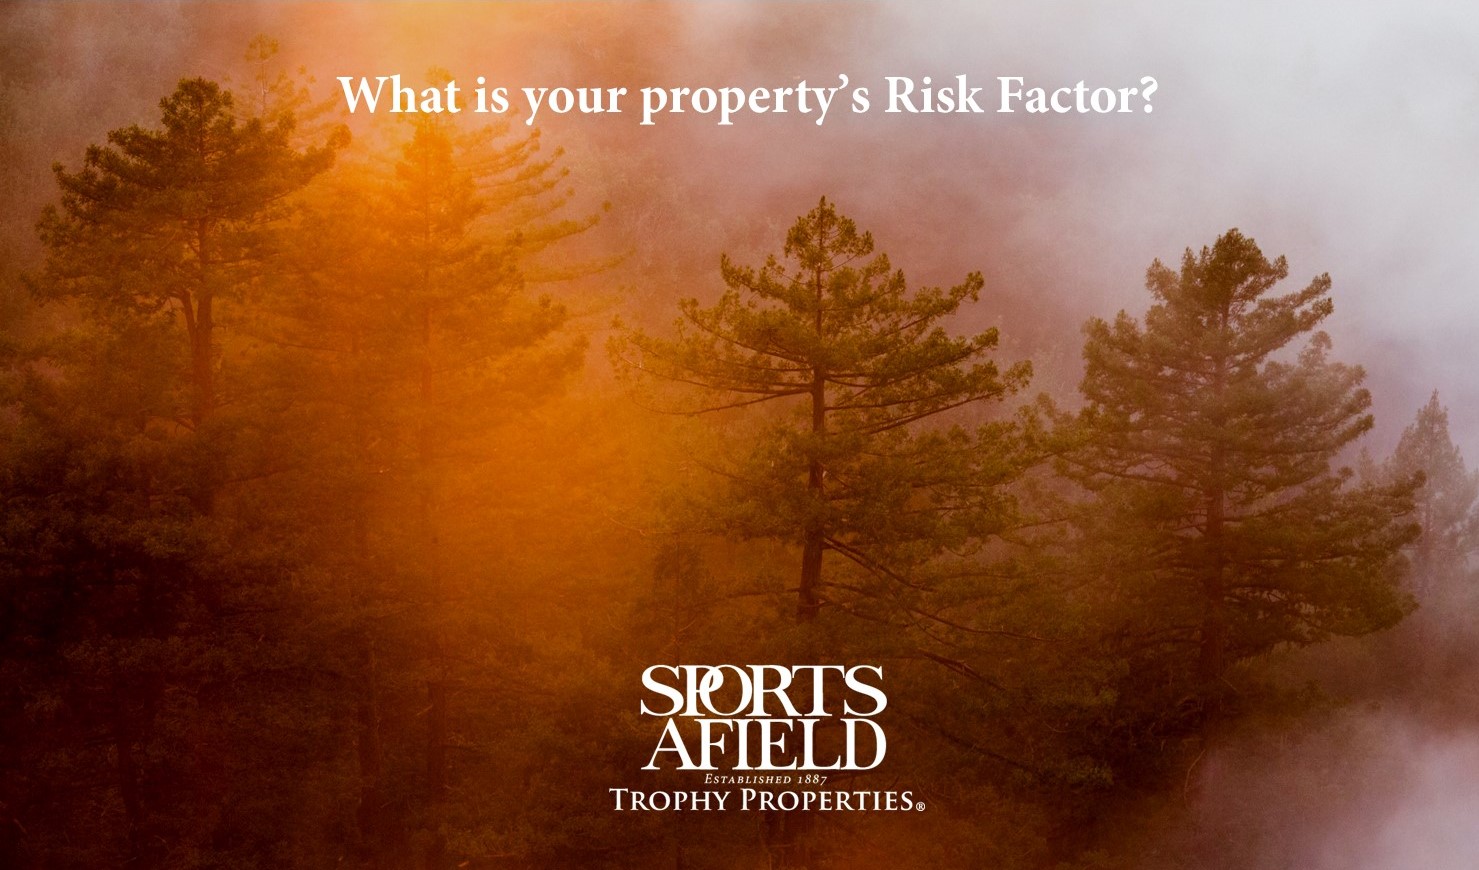 What is your property’s risk factor for flood, fire and extreme heat?